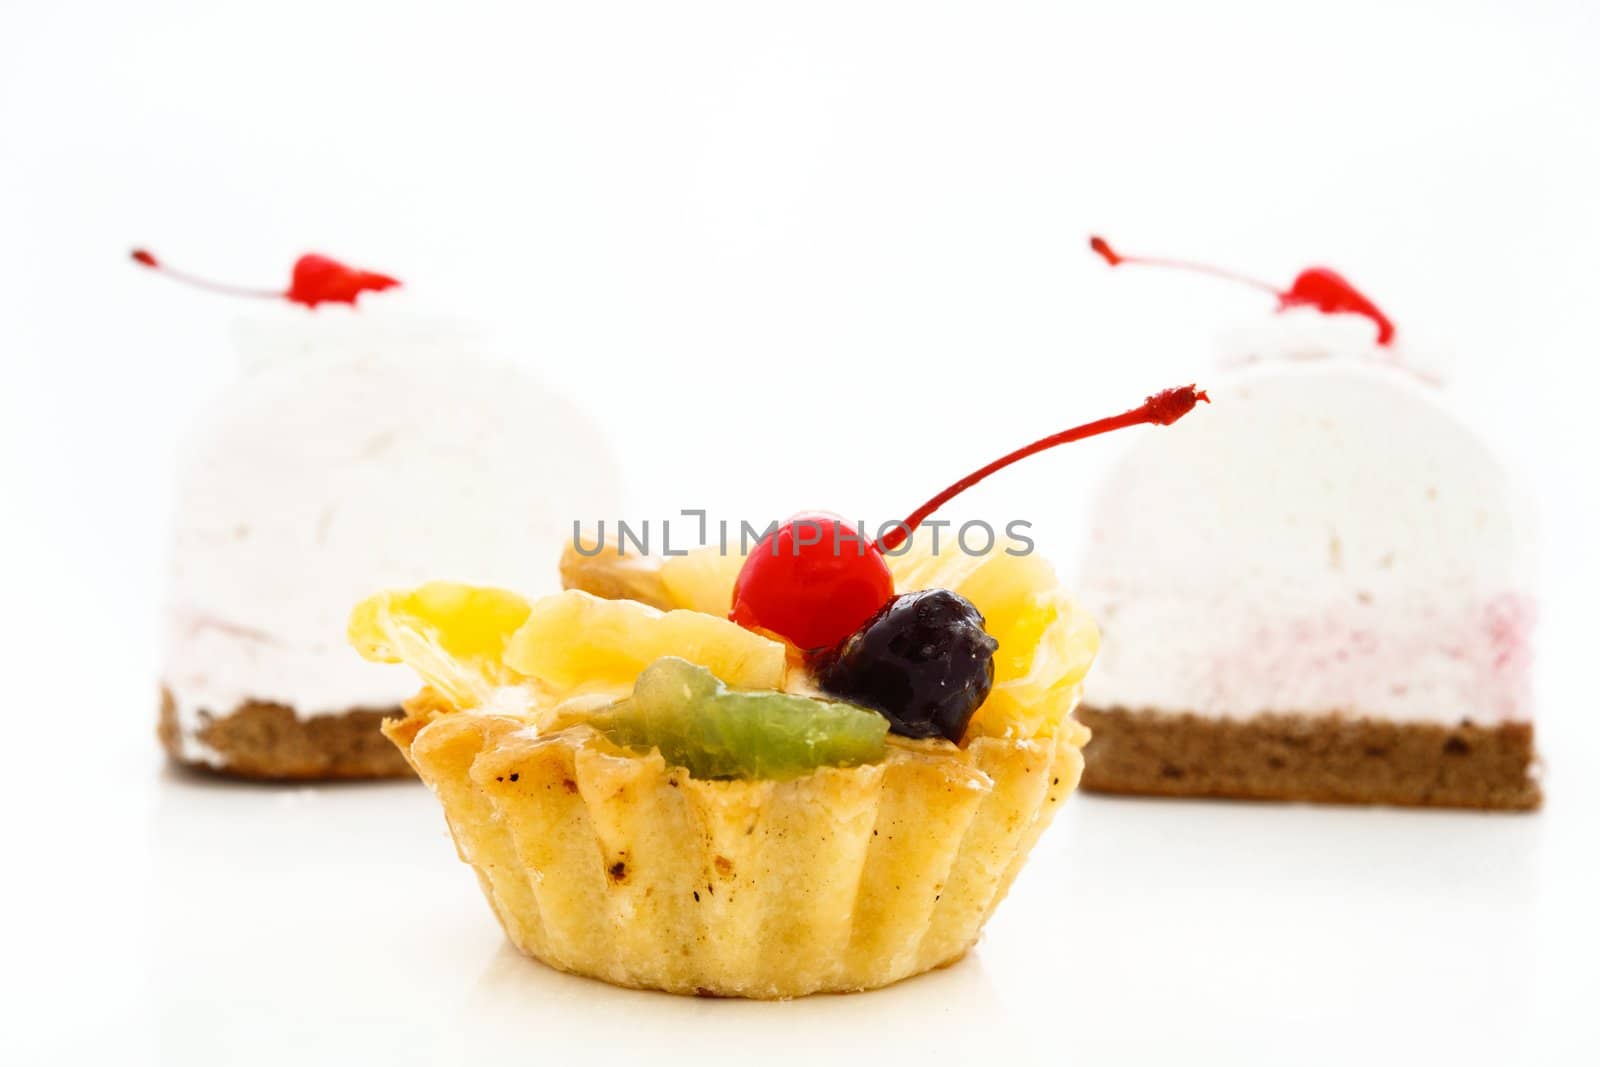 An image of cakes with cherry on top. On white background.